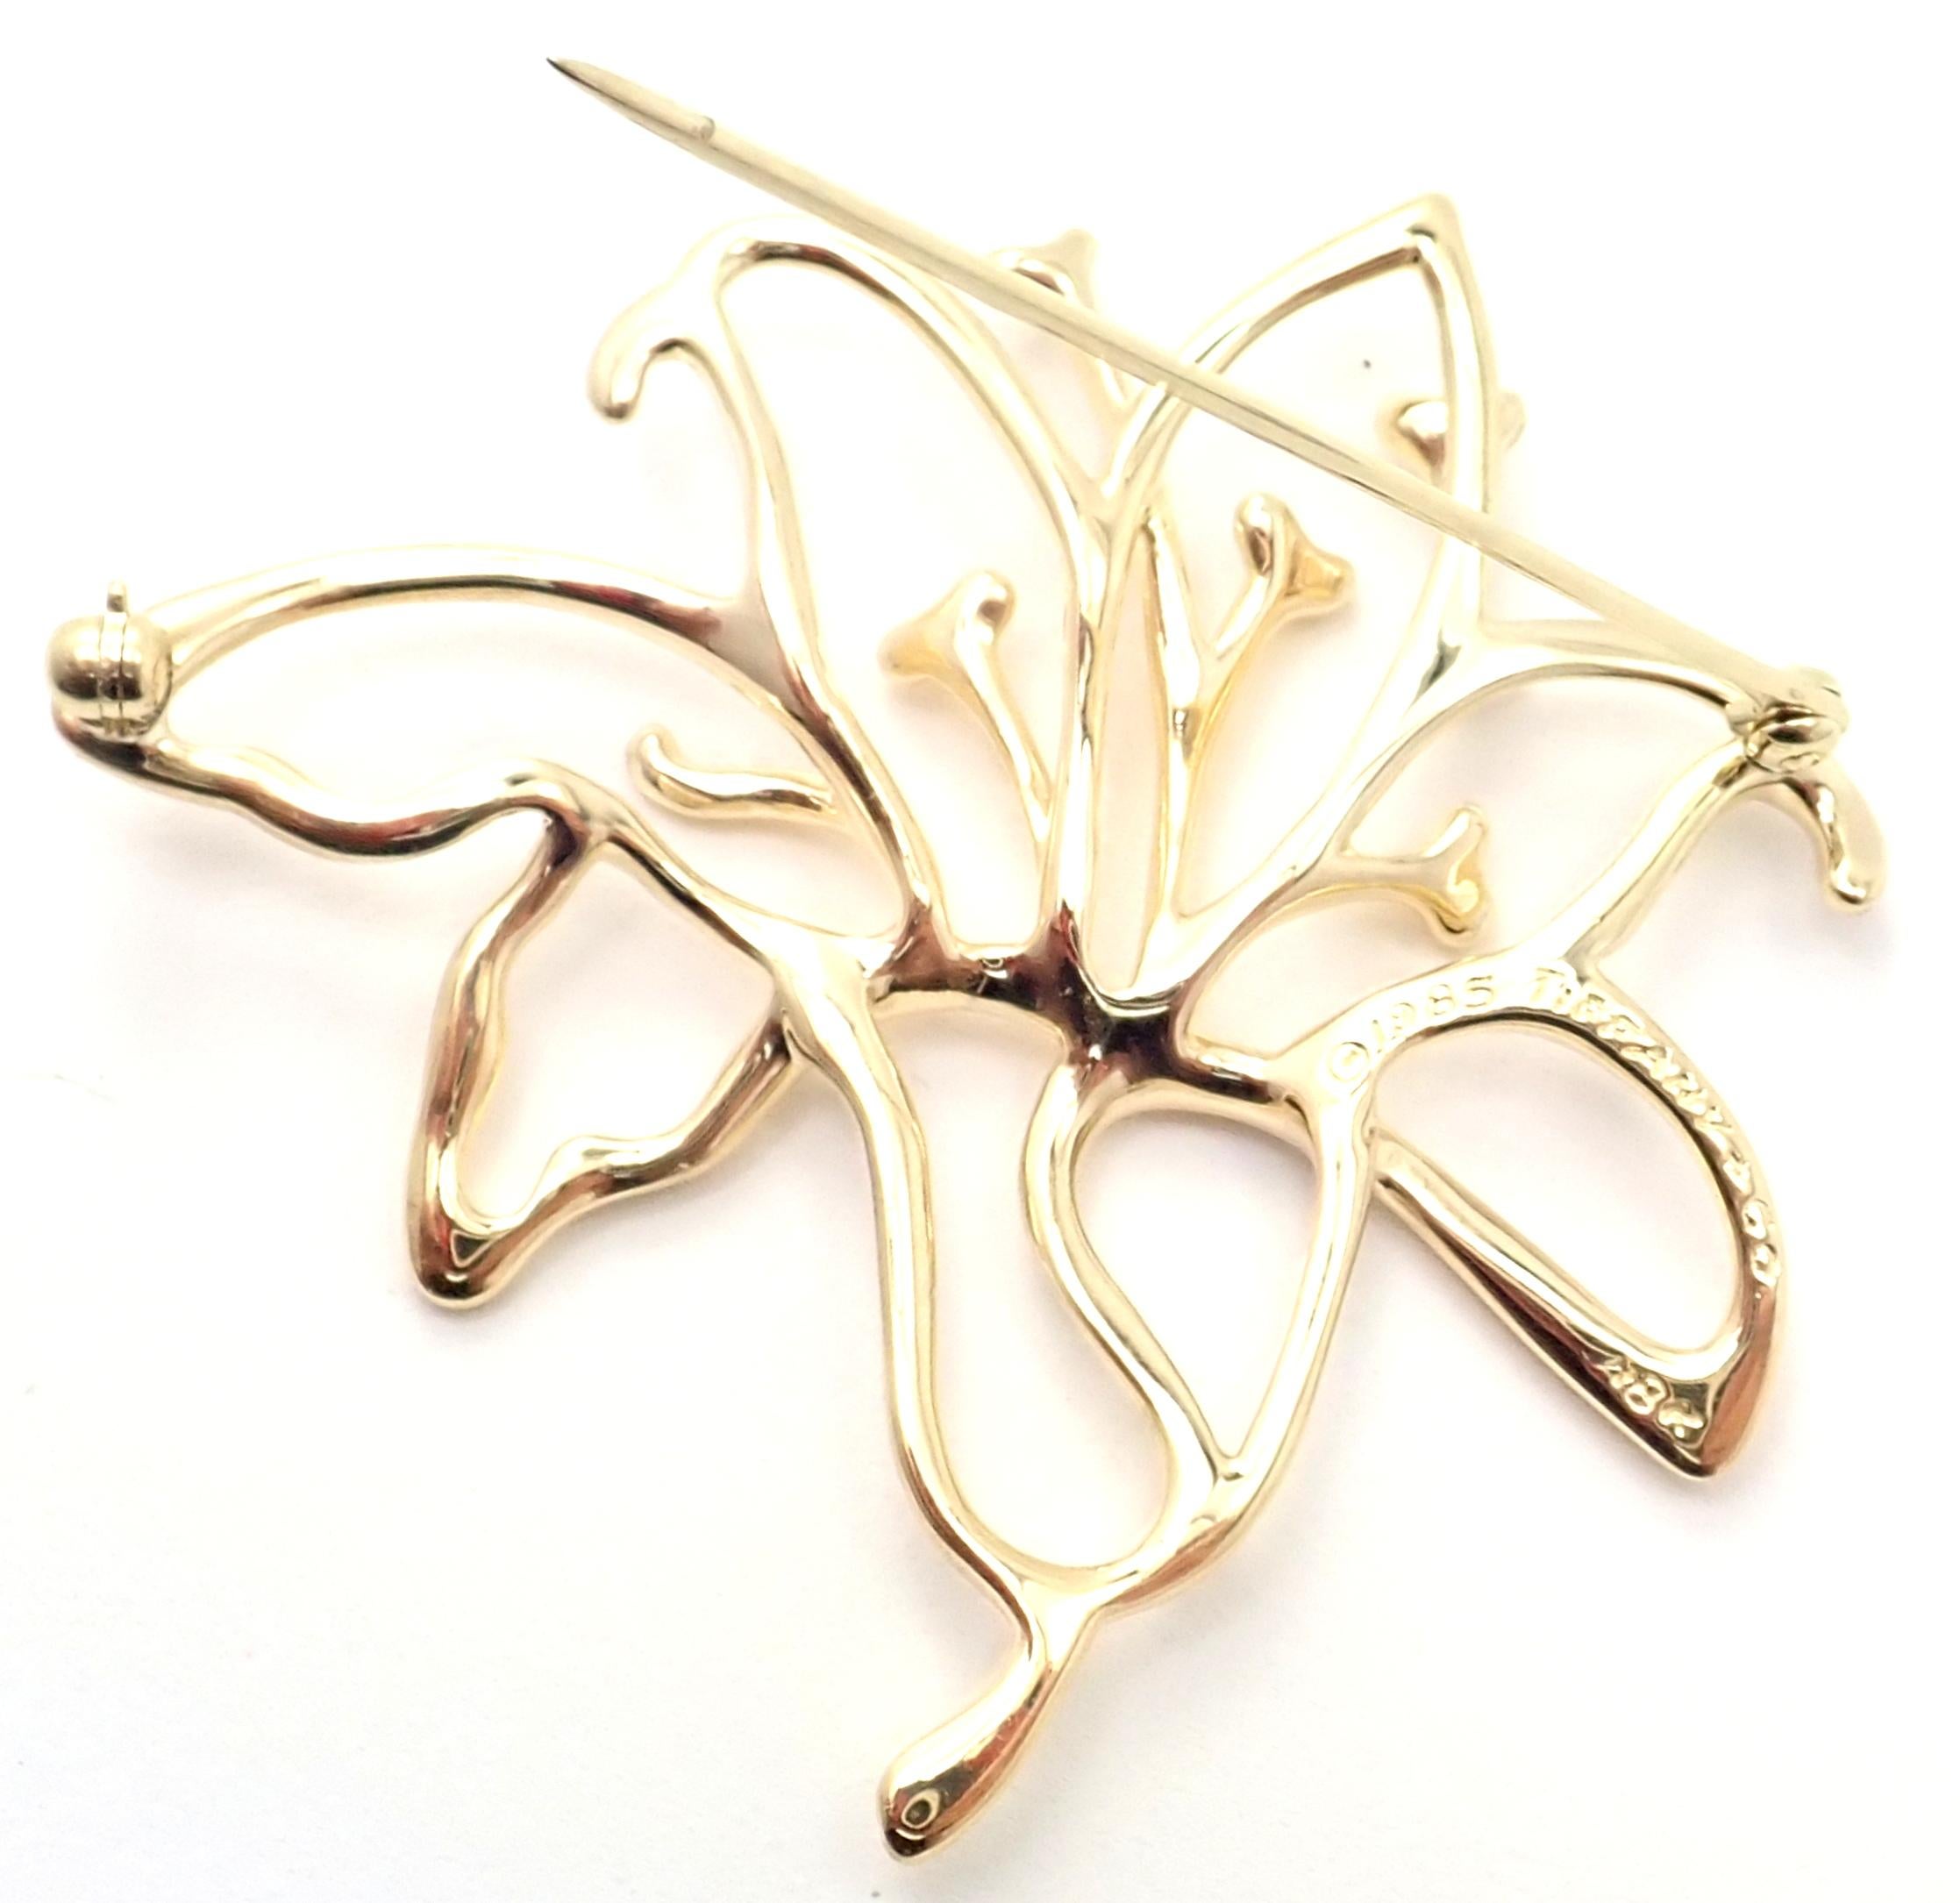 18k Yellow Gold Flower Brooch Pin by Tiffany & Co. 
Details: 
Measurements: 2